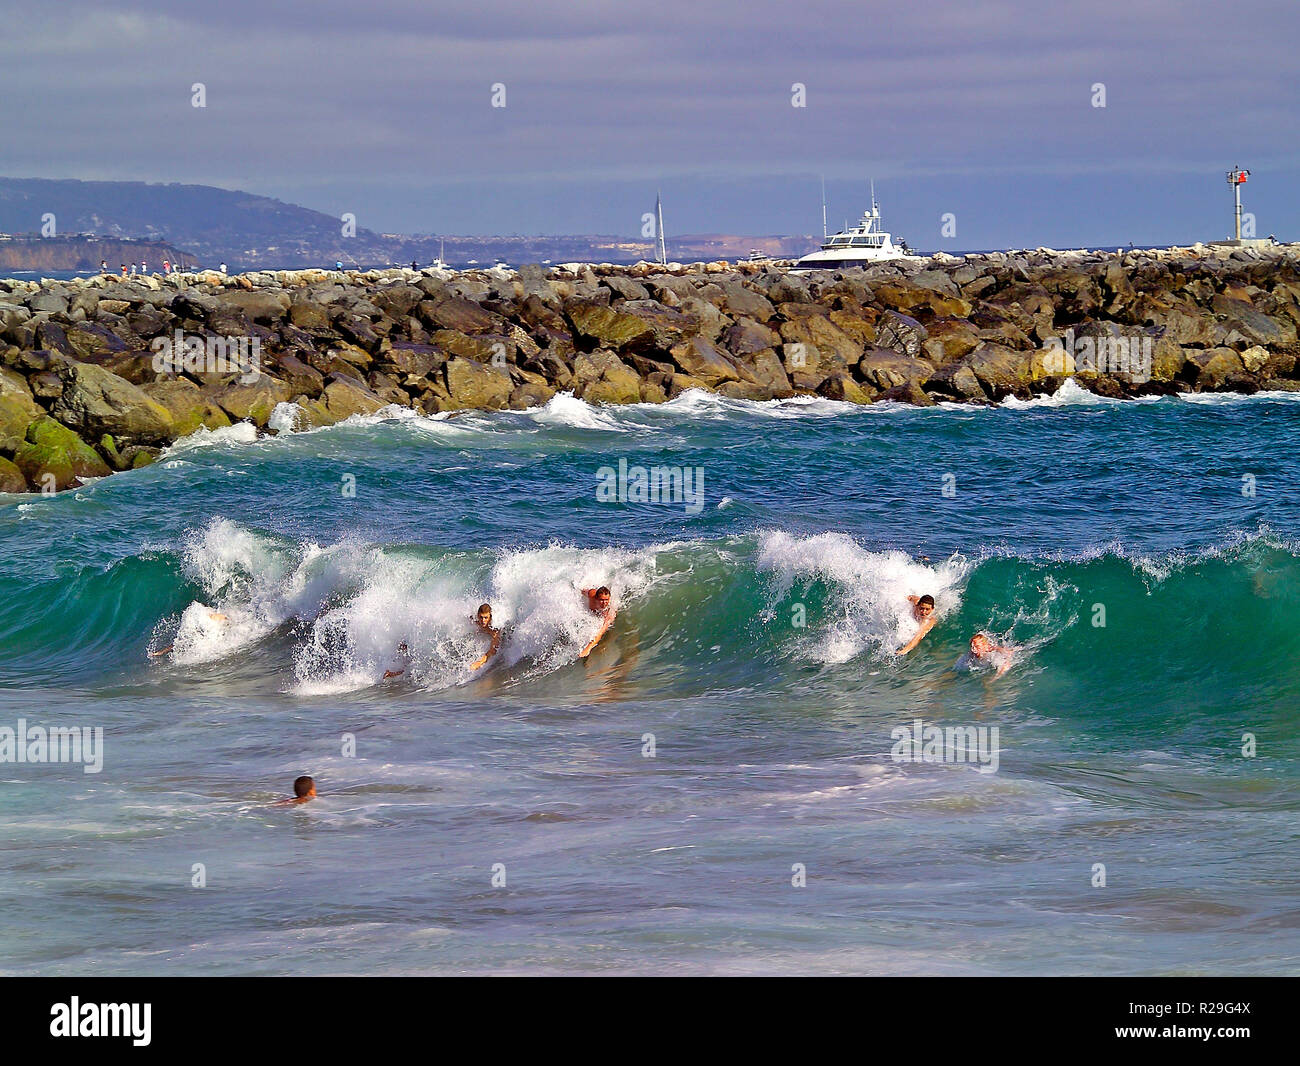 Bodysurfers ride Pacific Ocean surf at The Wedge on the Balboa Peninsula, where extreme waves form next to the rock jetty that protects the boat channel entrance to Newport Harbor at Newport Beach in Orange County, Southern California, USA. Stock Photo